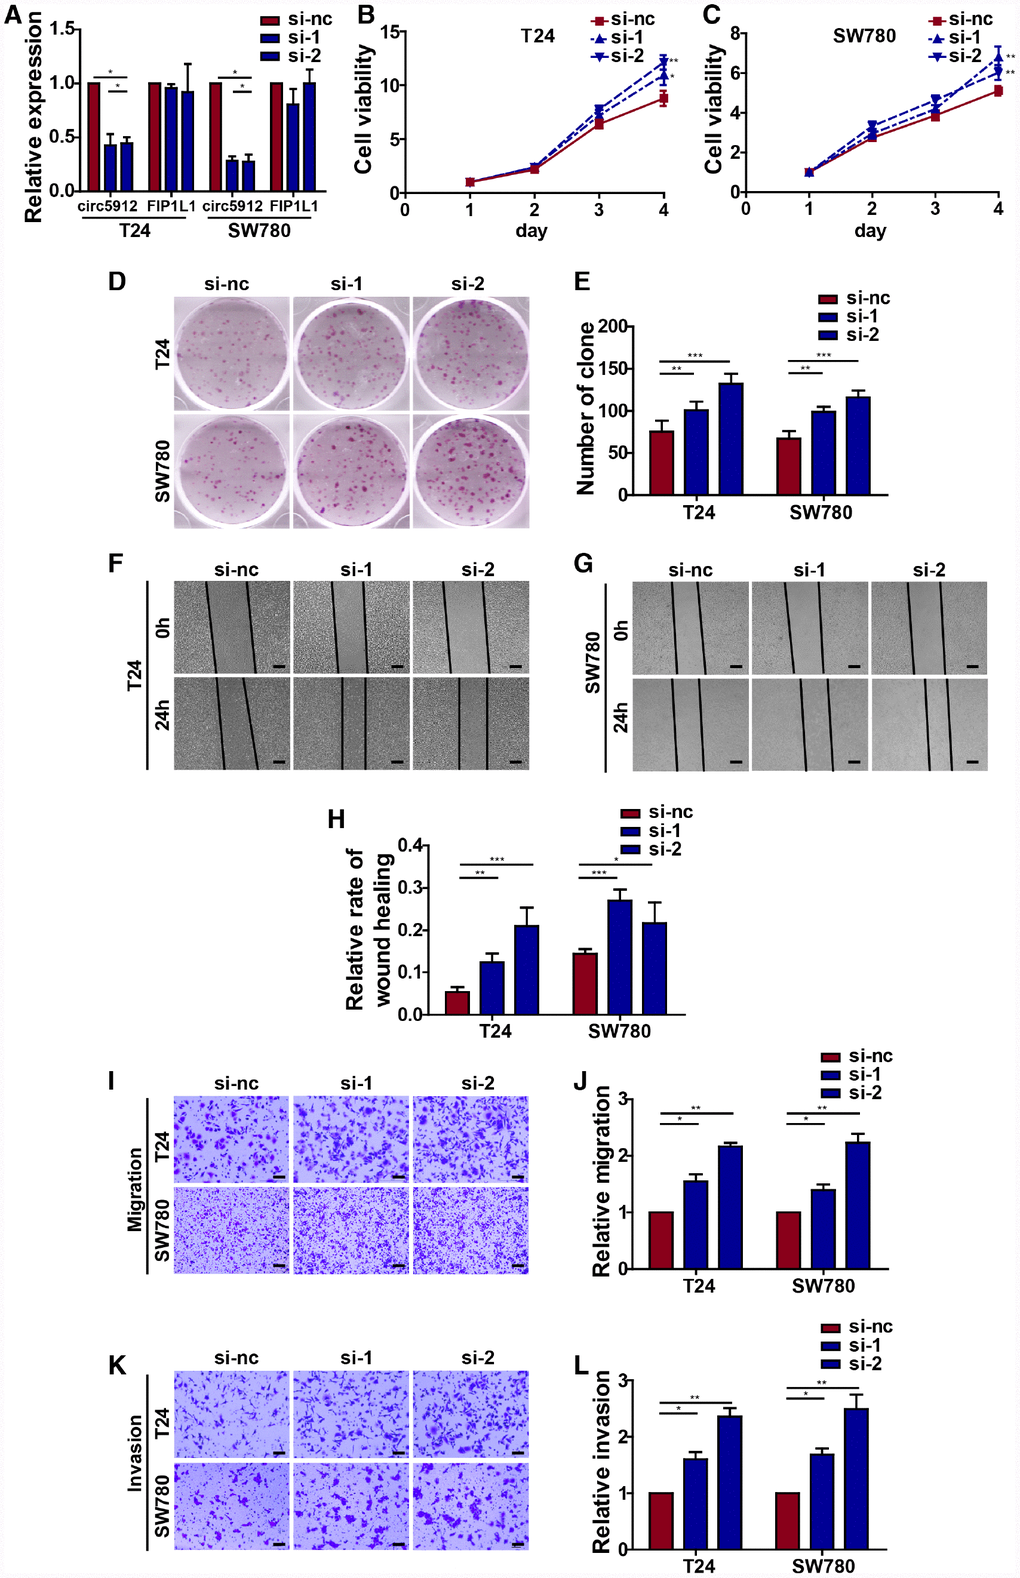 Silencing circ5912 promotes bladder cancer cell growth and metastasis in vitro. Two siRNAs that targeted circ5912 were designed and synthesized. (A) qPCR detected levels of circ5912 and FIP1L1 after treatment with the siRNAs; (B, C) a CCK8 assay was performed to evaluate cell viability; (D, E) a clone forming assay was performed to detect the ability of self-renewal; (F–H) wound healing ability was measured by the distance between the two sides of induced injury after 24 hours, scale bar: 100μm; (I–L) migration and invasion were assessed by counting cells that were able to penetrate the trans-well membrane, scale bar: 25μm.